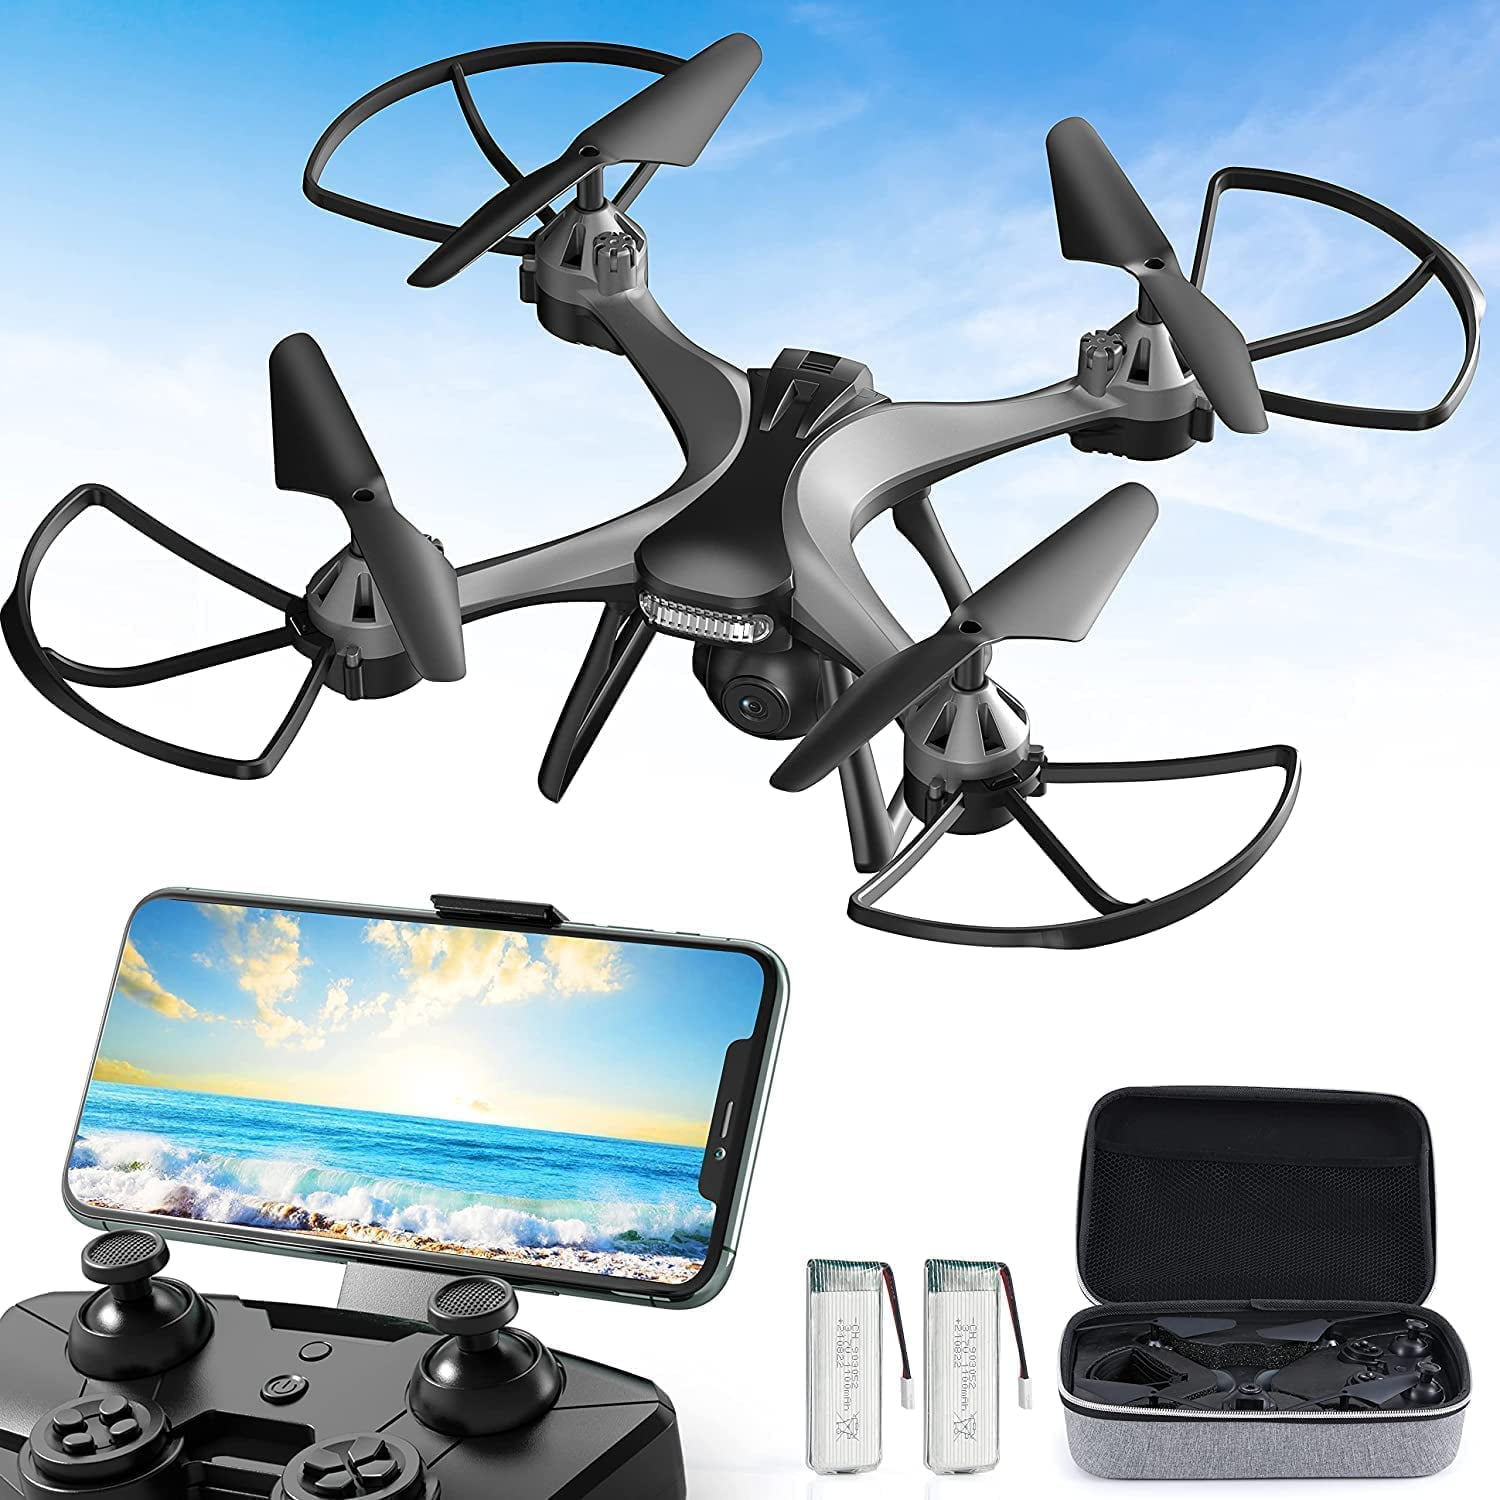 1080P HD FPV Camera RC Quadcopter Gifts Boys Toys Altitude Hold Headless Mode One Key Start Speed Adjustment Voice Gesture APP Control Maetot Drones for Kids Adults Beginners 360° Flips 2 Batteries 